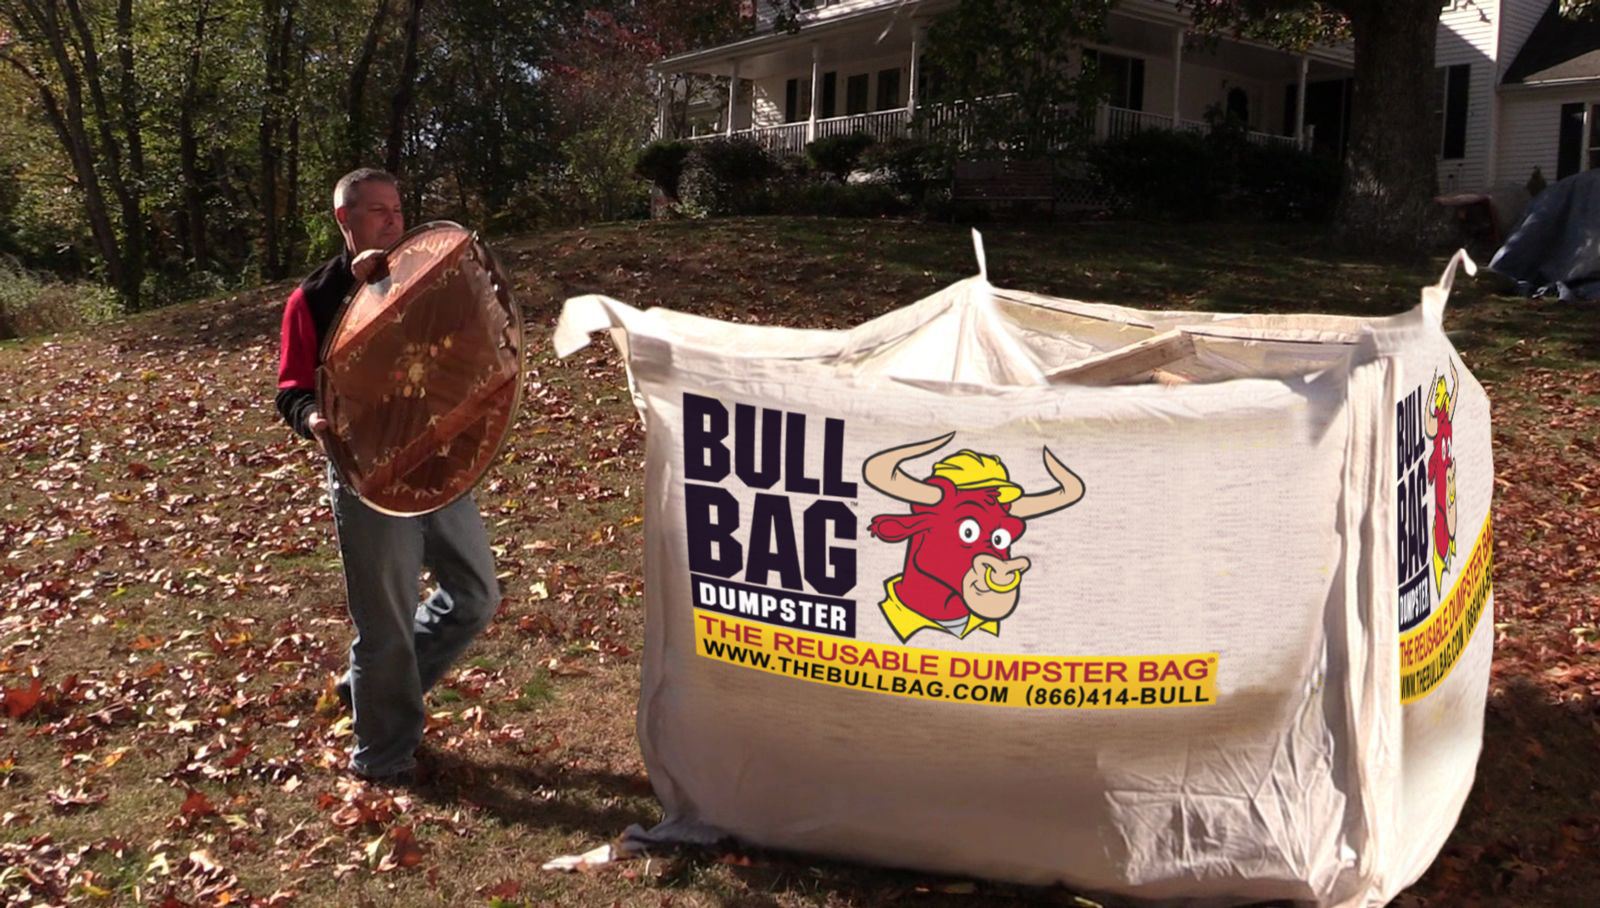 Family Owned BullBag Dumpster Bag Deploys More of its Team to Help Houston